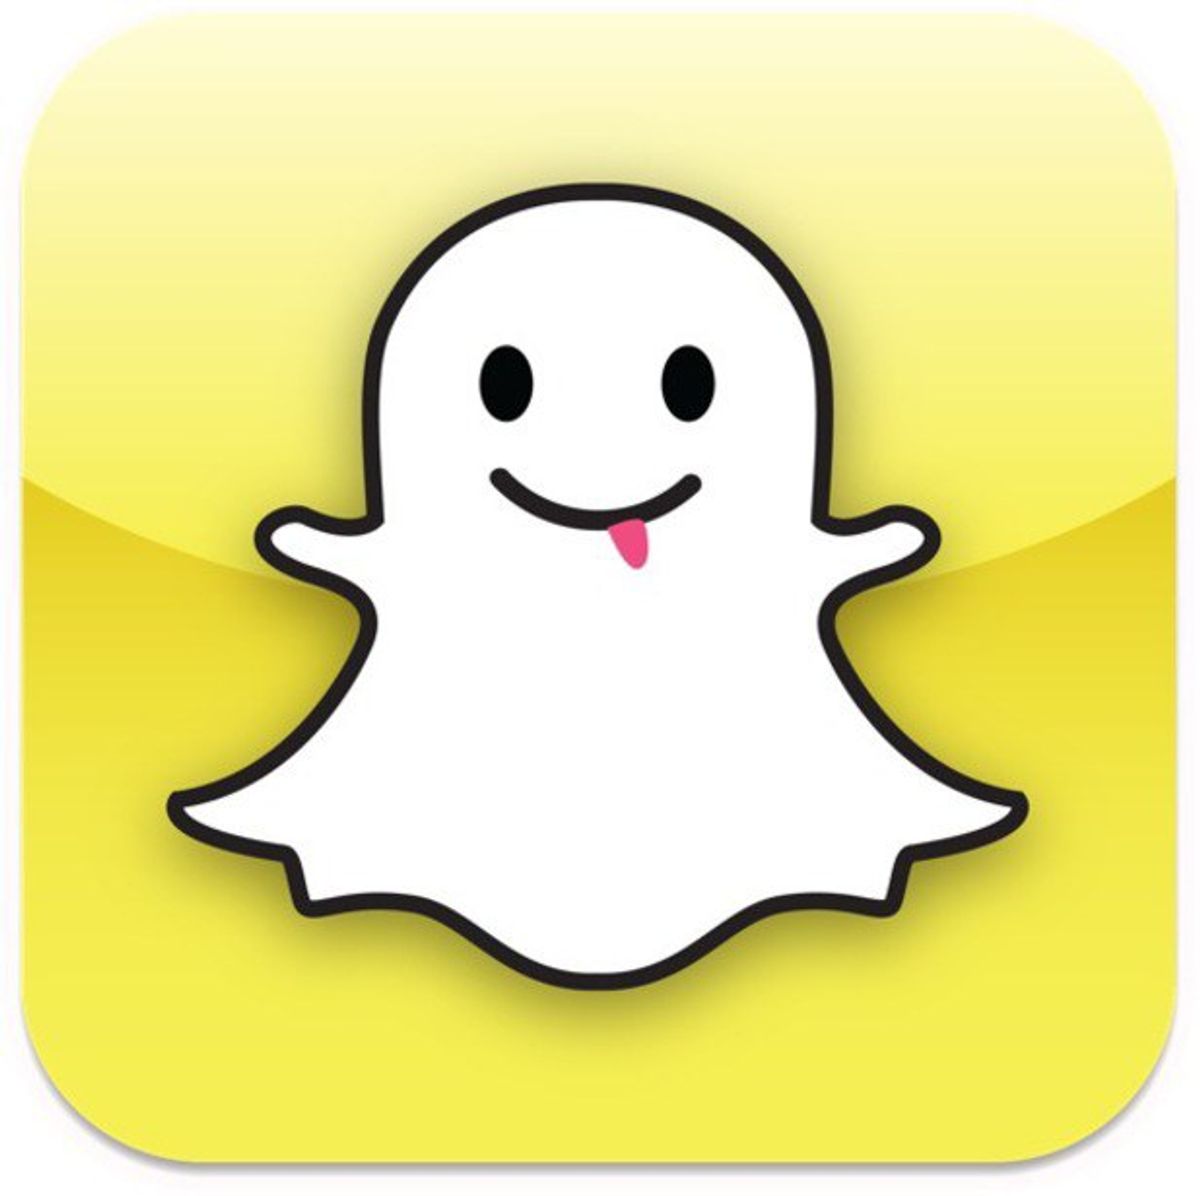 21 Phases Of The Evolution Of Snapchat